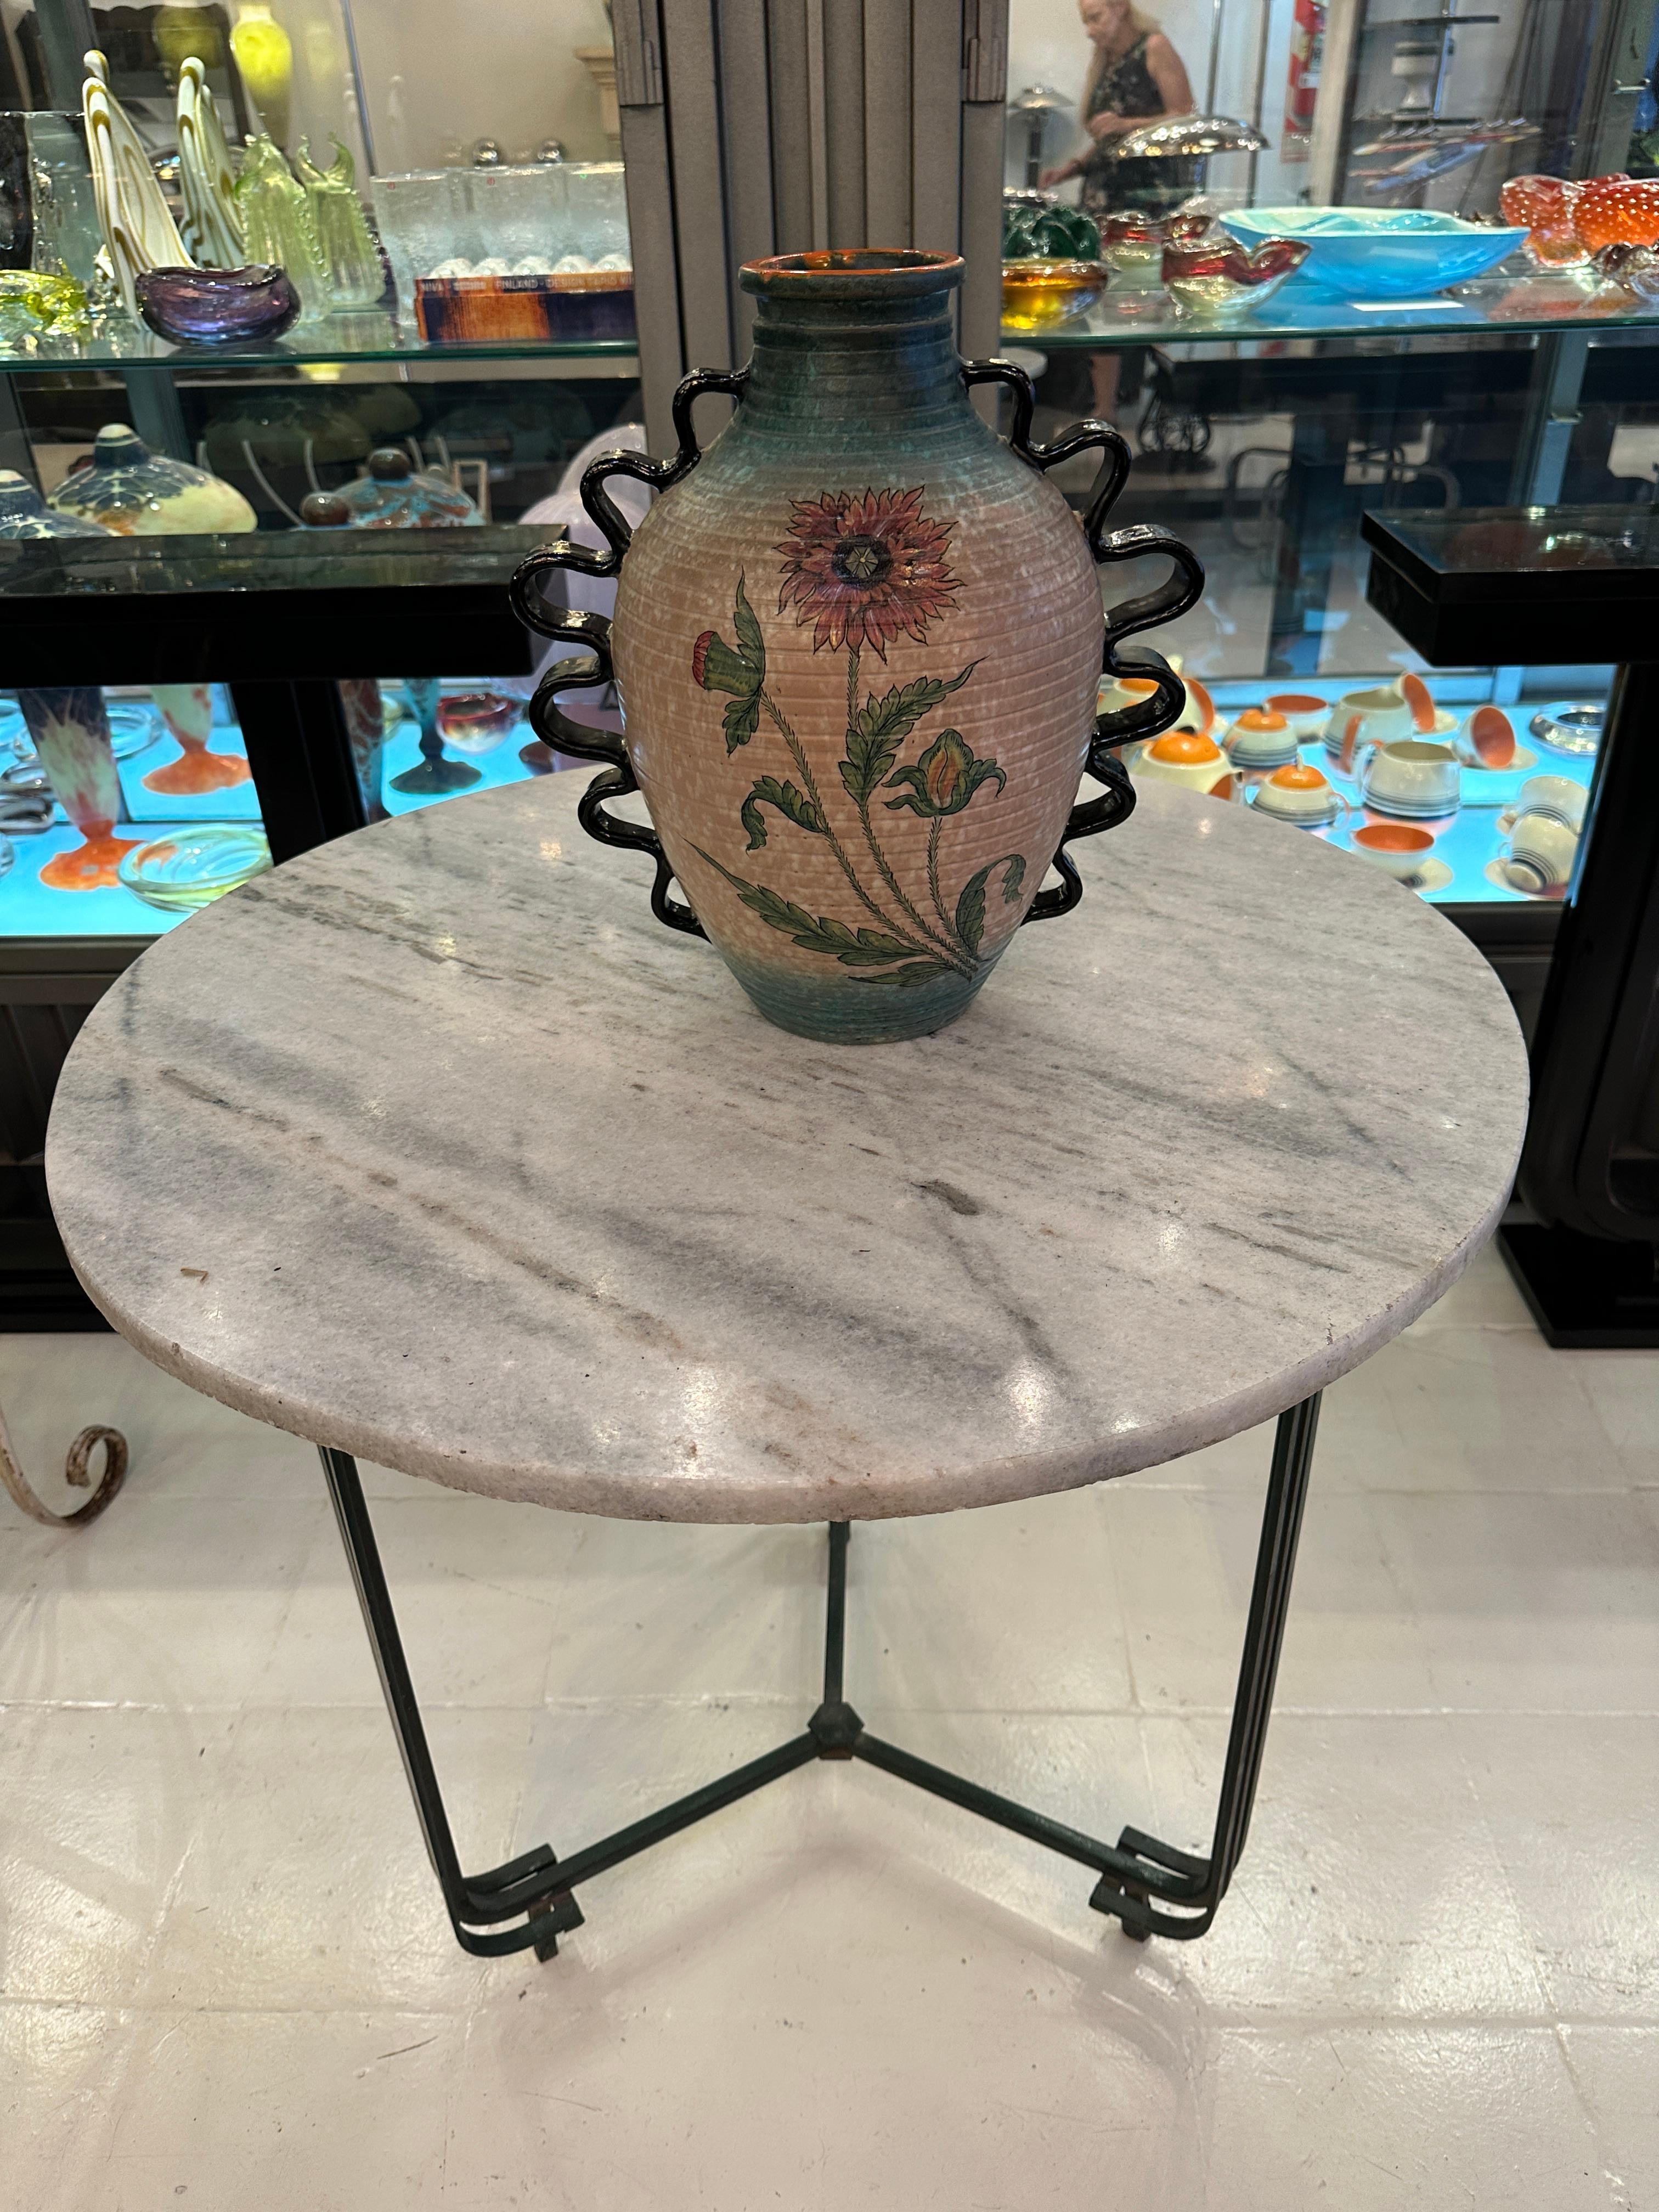 Sign: Deruta  Italy 25367/ G
We have specialized in the sale of Art Deco and Art Nouveau and Vintage styles since 1982. If you have any questions we are at your disposal.
Pushing the button that reads 'View All From Seller'. And you can see more